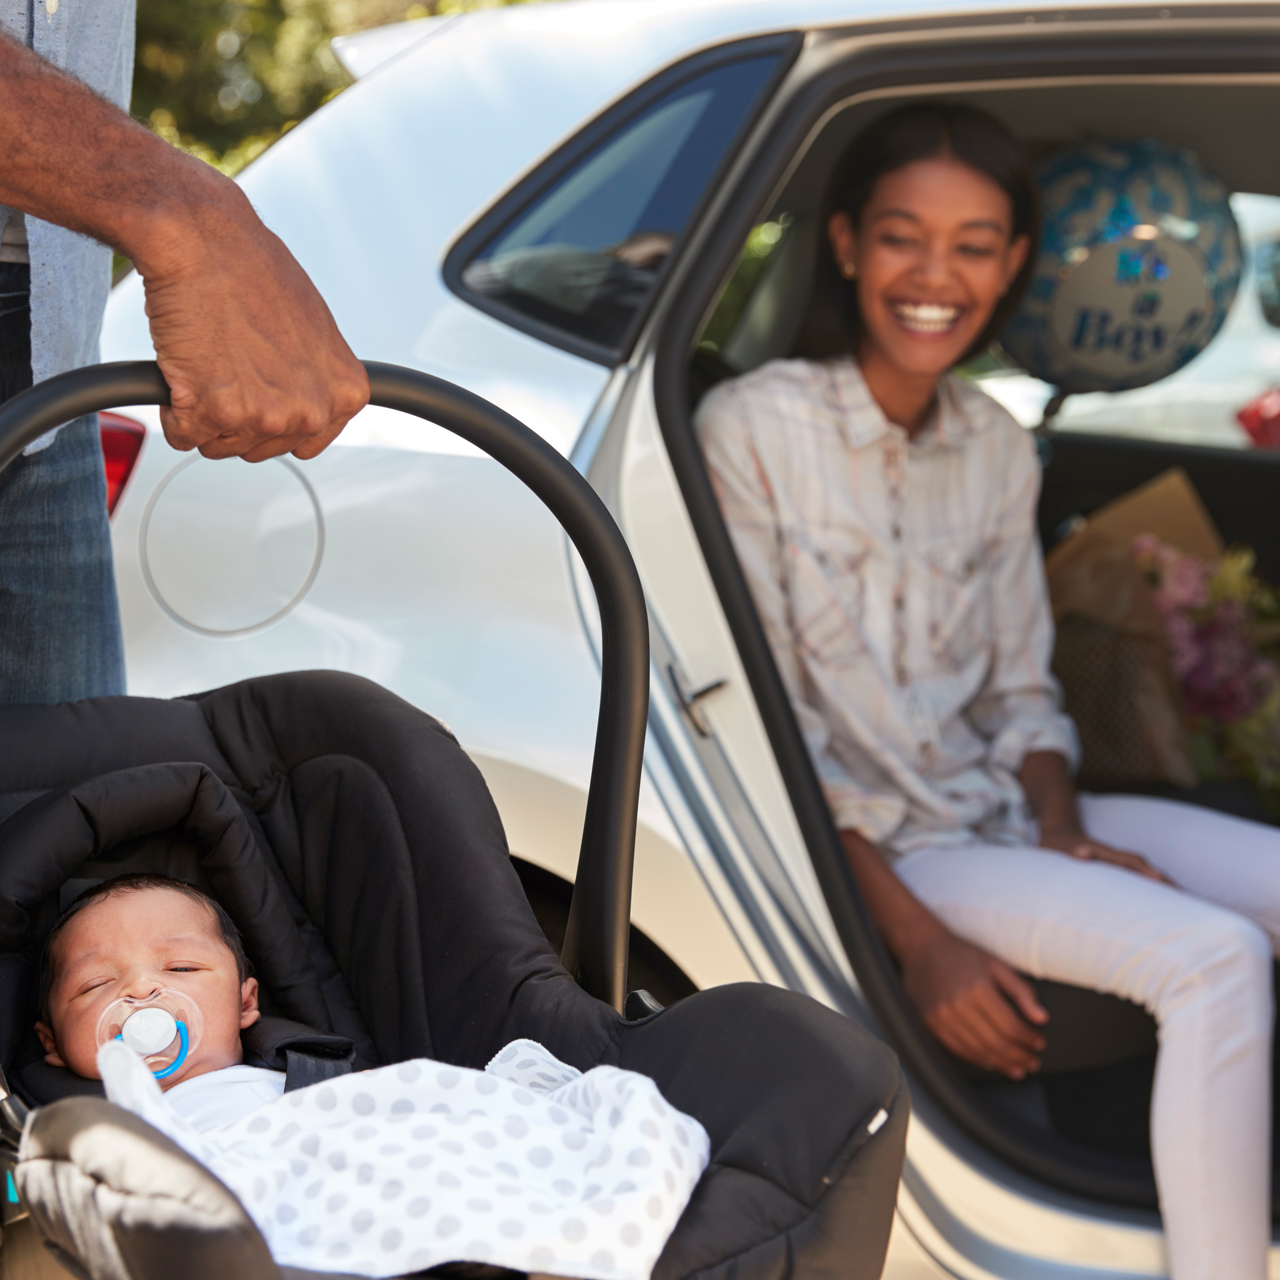 Girl in a car looking at baby in a car seat